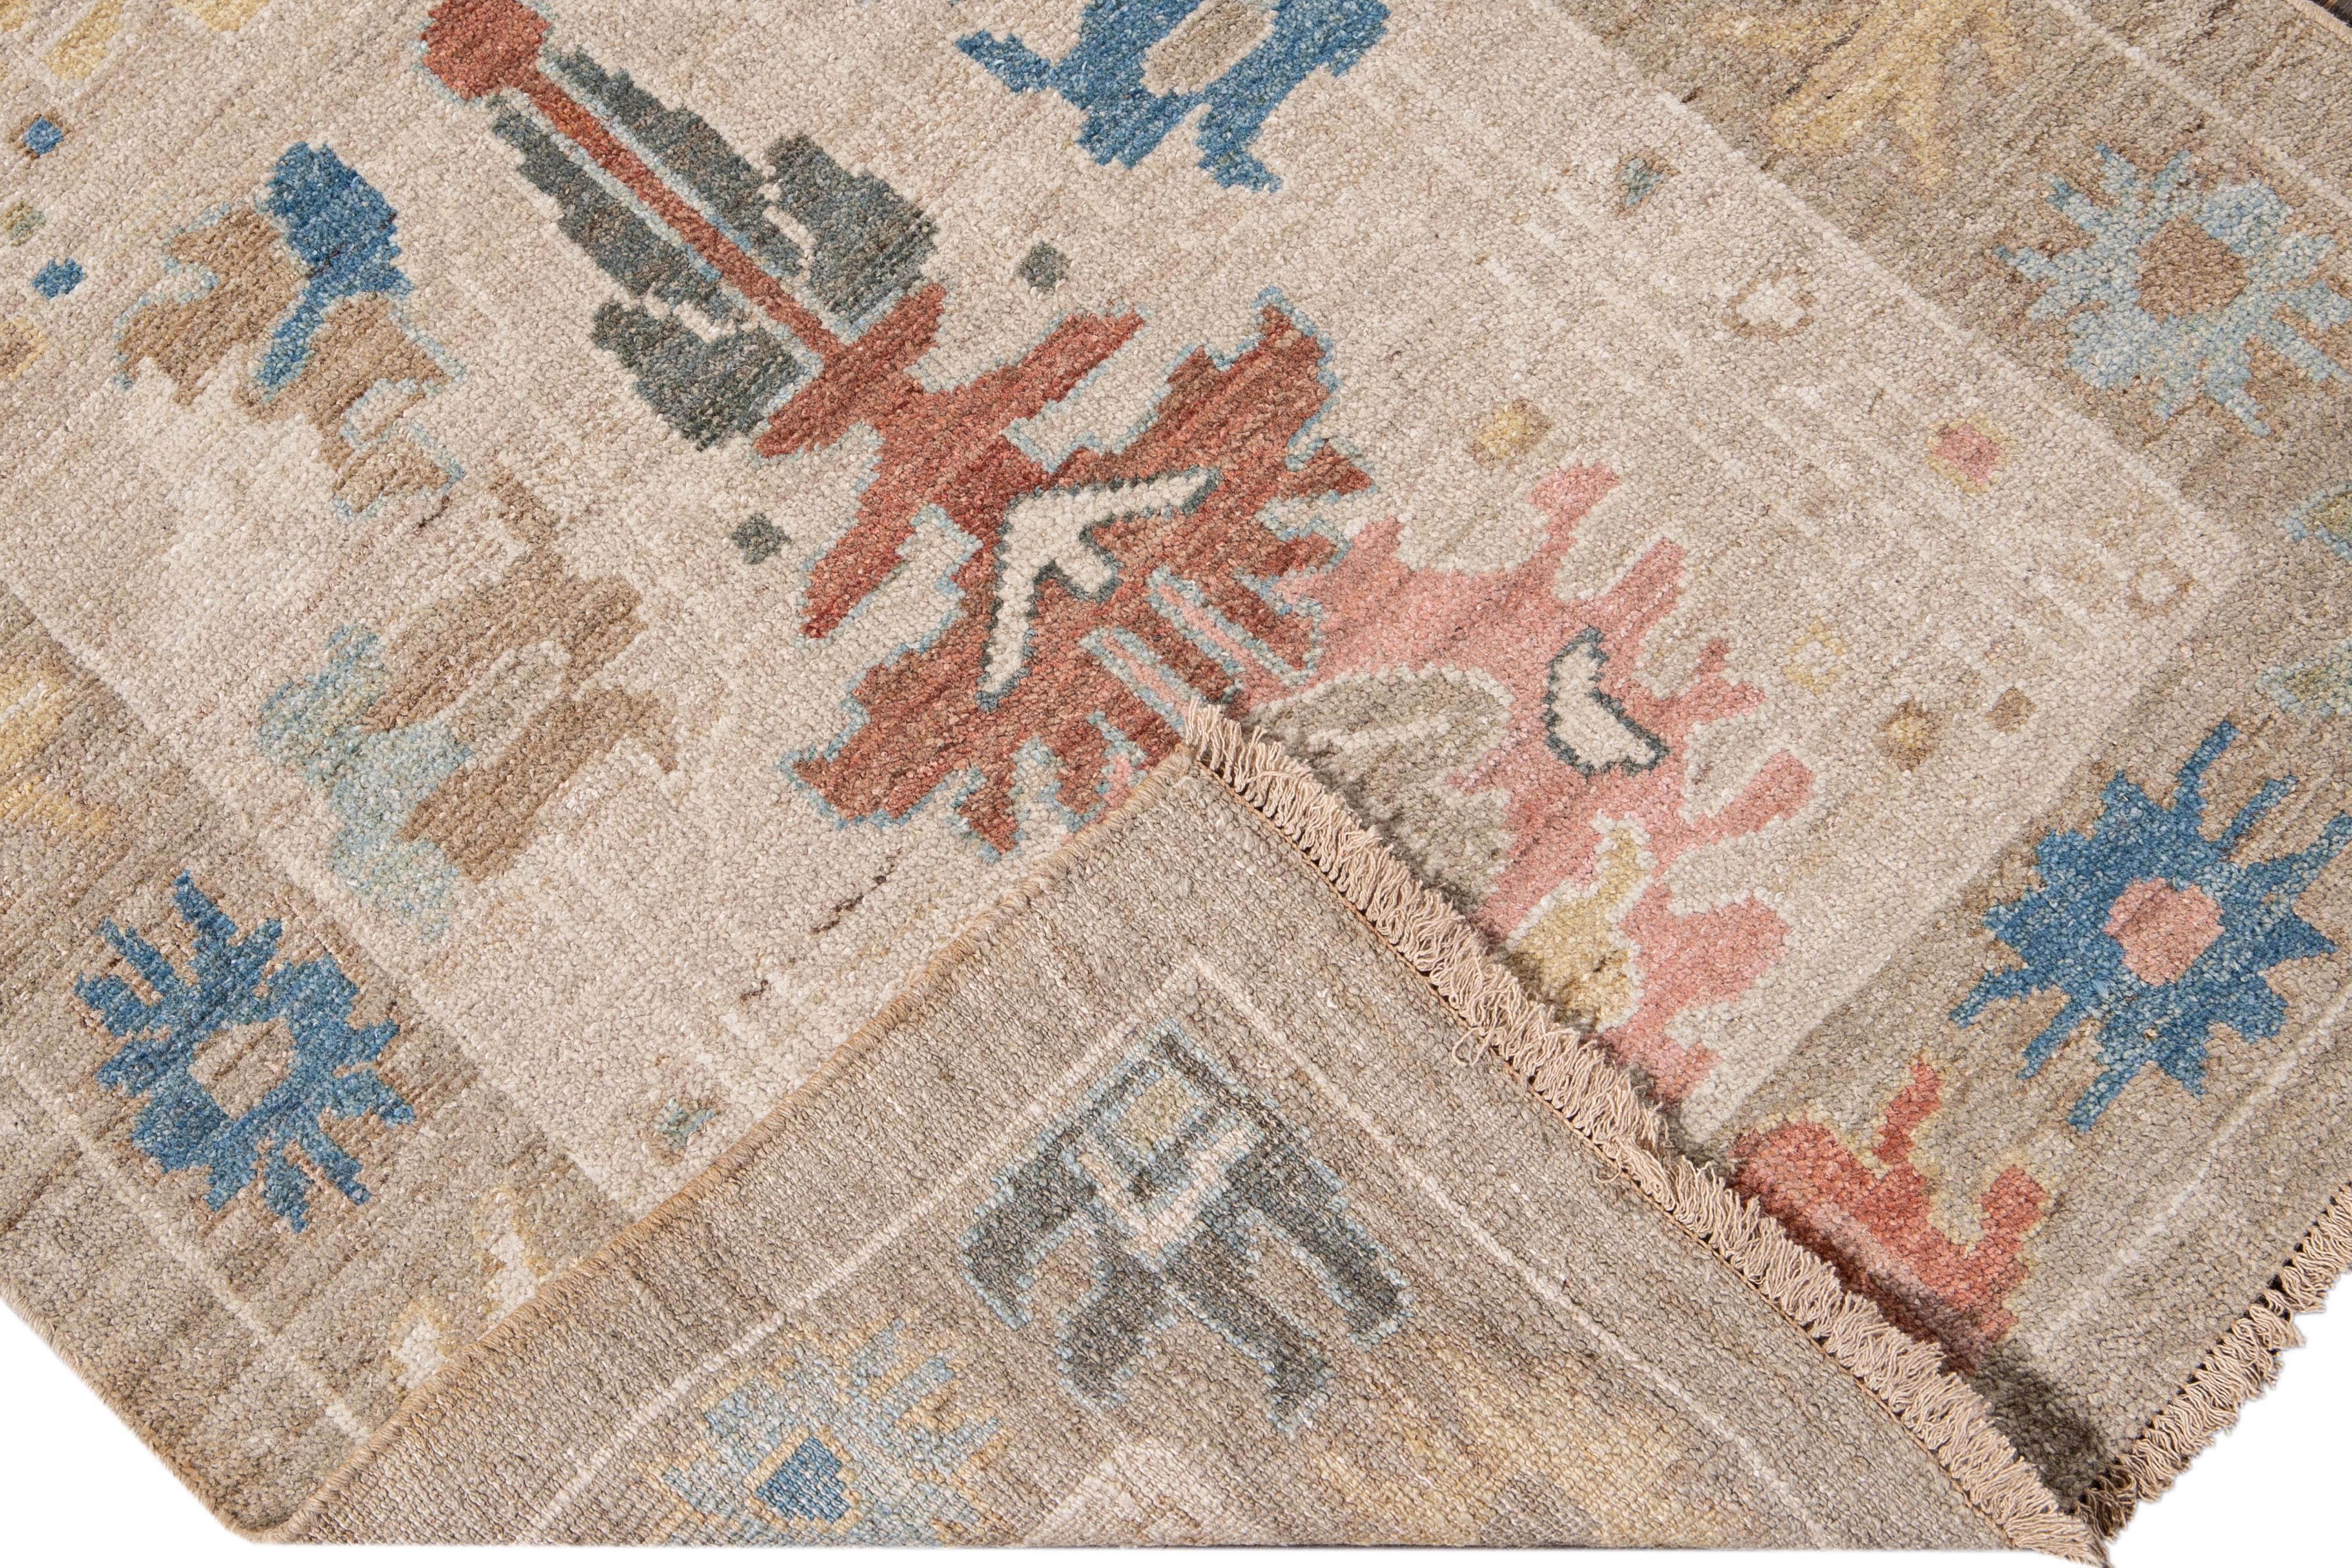 Beautiful modern Sultanabad hand-knotted wool runner with a beige field. This Sultanabad runner has a tan frame and yellow, blue, pink, and brown accent in a gorgeous all-over Classic floral design.

This rug measures: 3' x 22'10